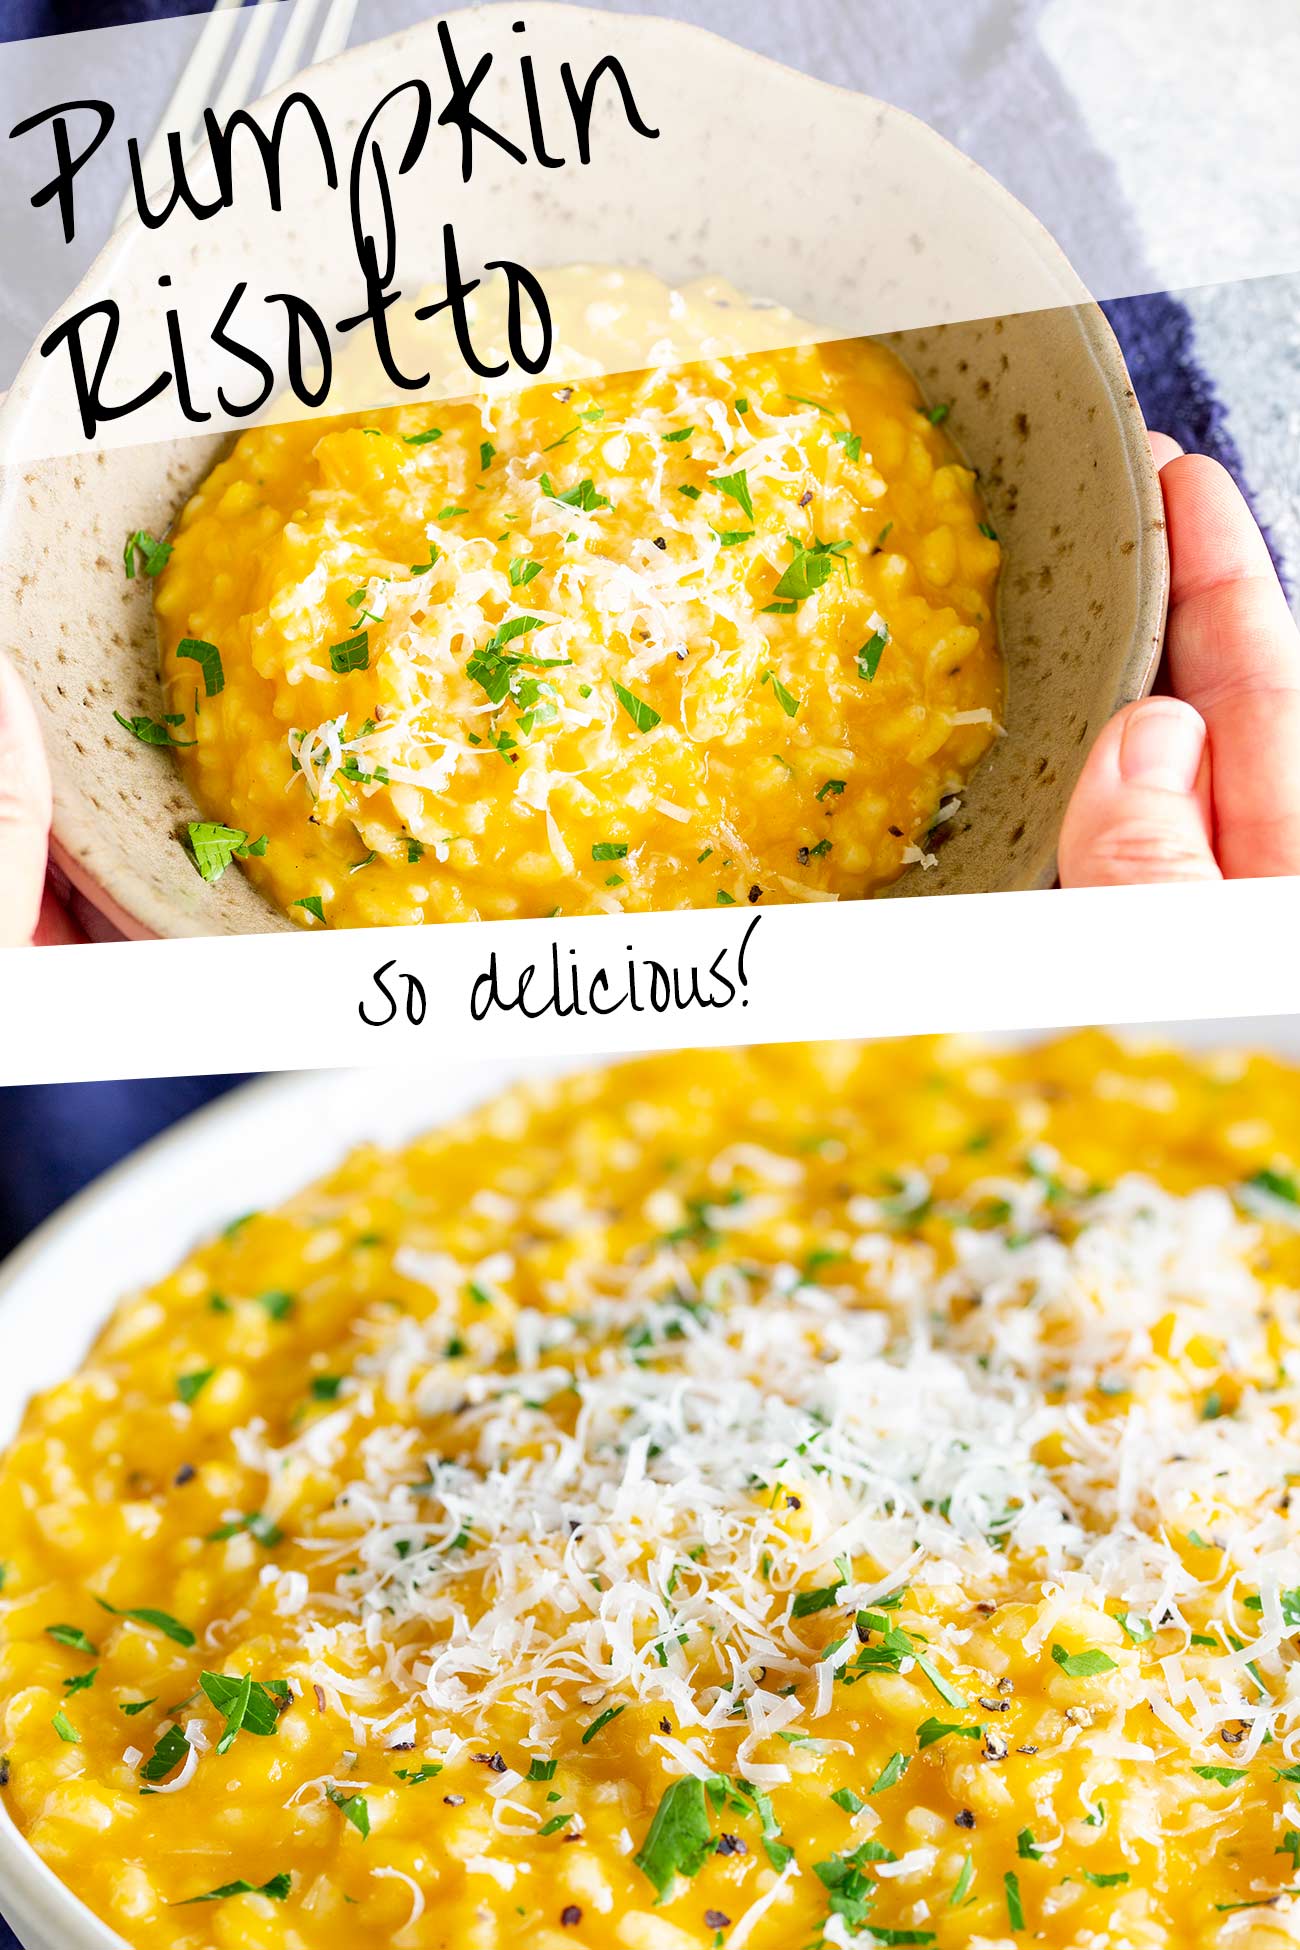 PINTEREST IMAGE - a bowl of pumpkin risotto with text overlay